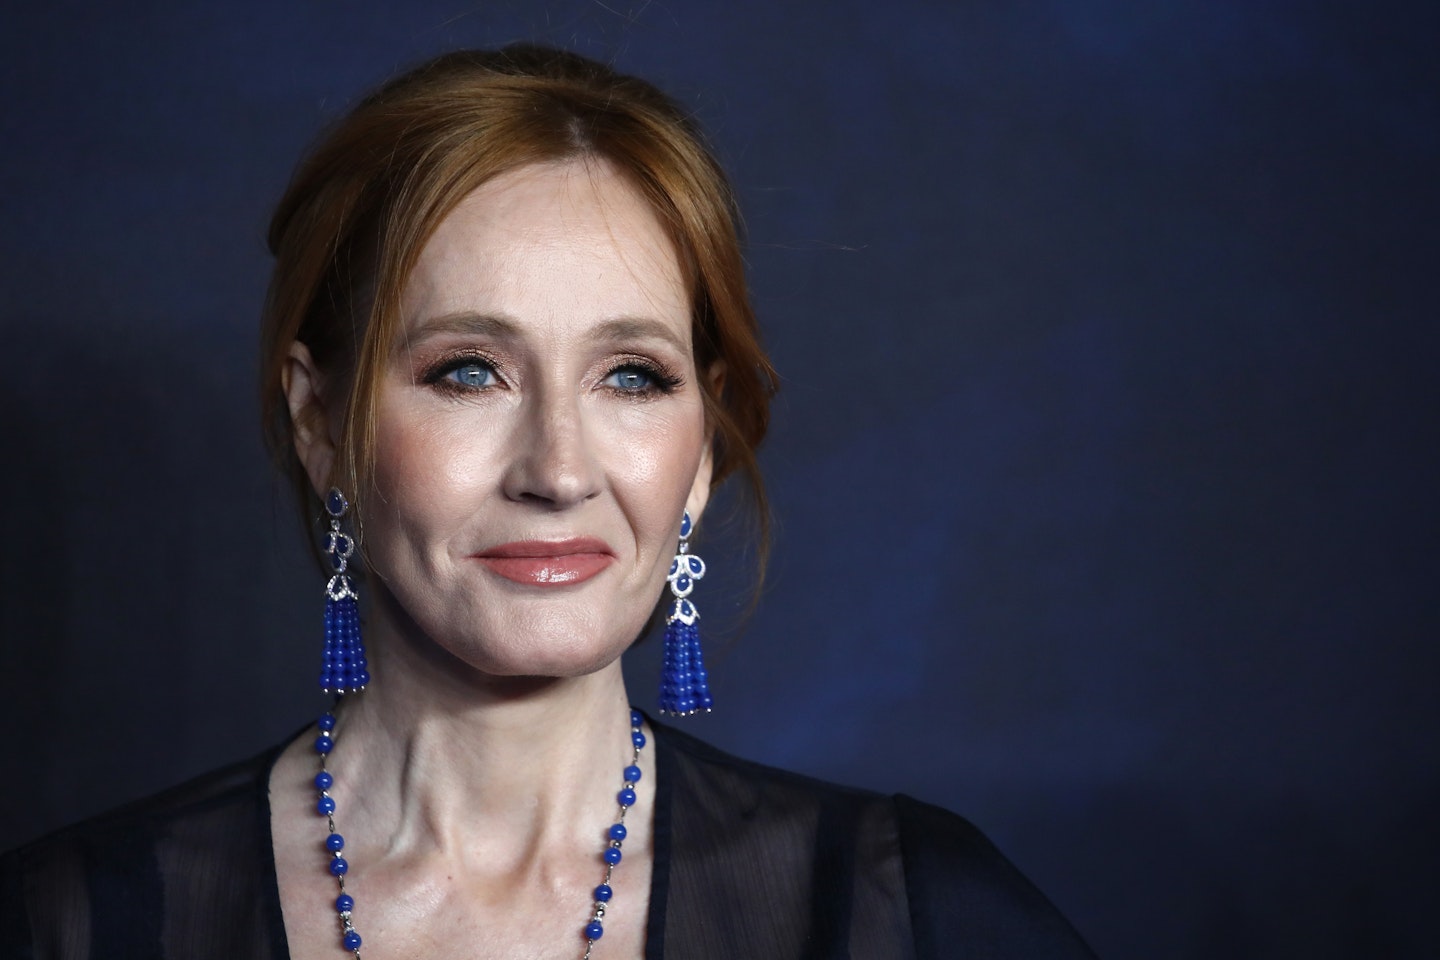 JK Rowling Is At The Centre Of A Transphobia Row 